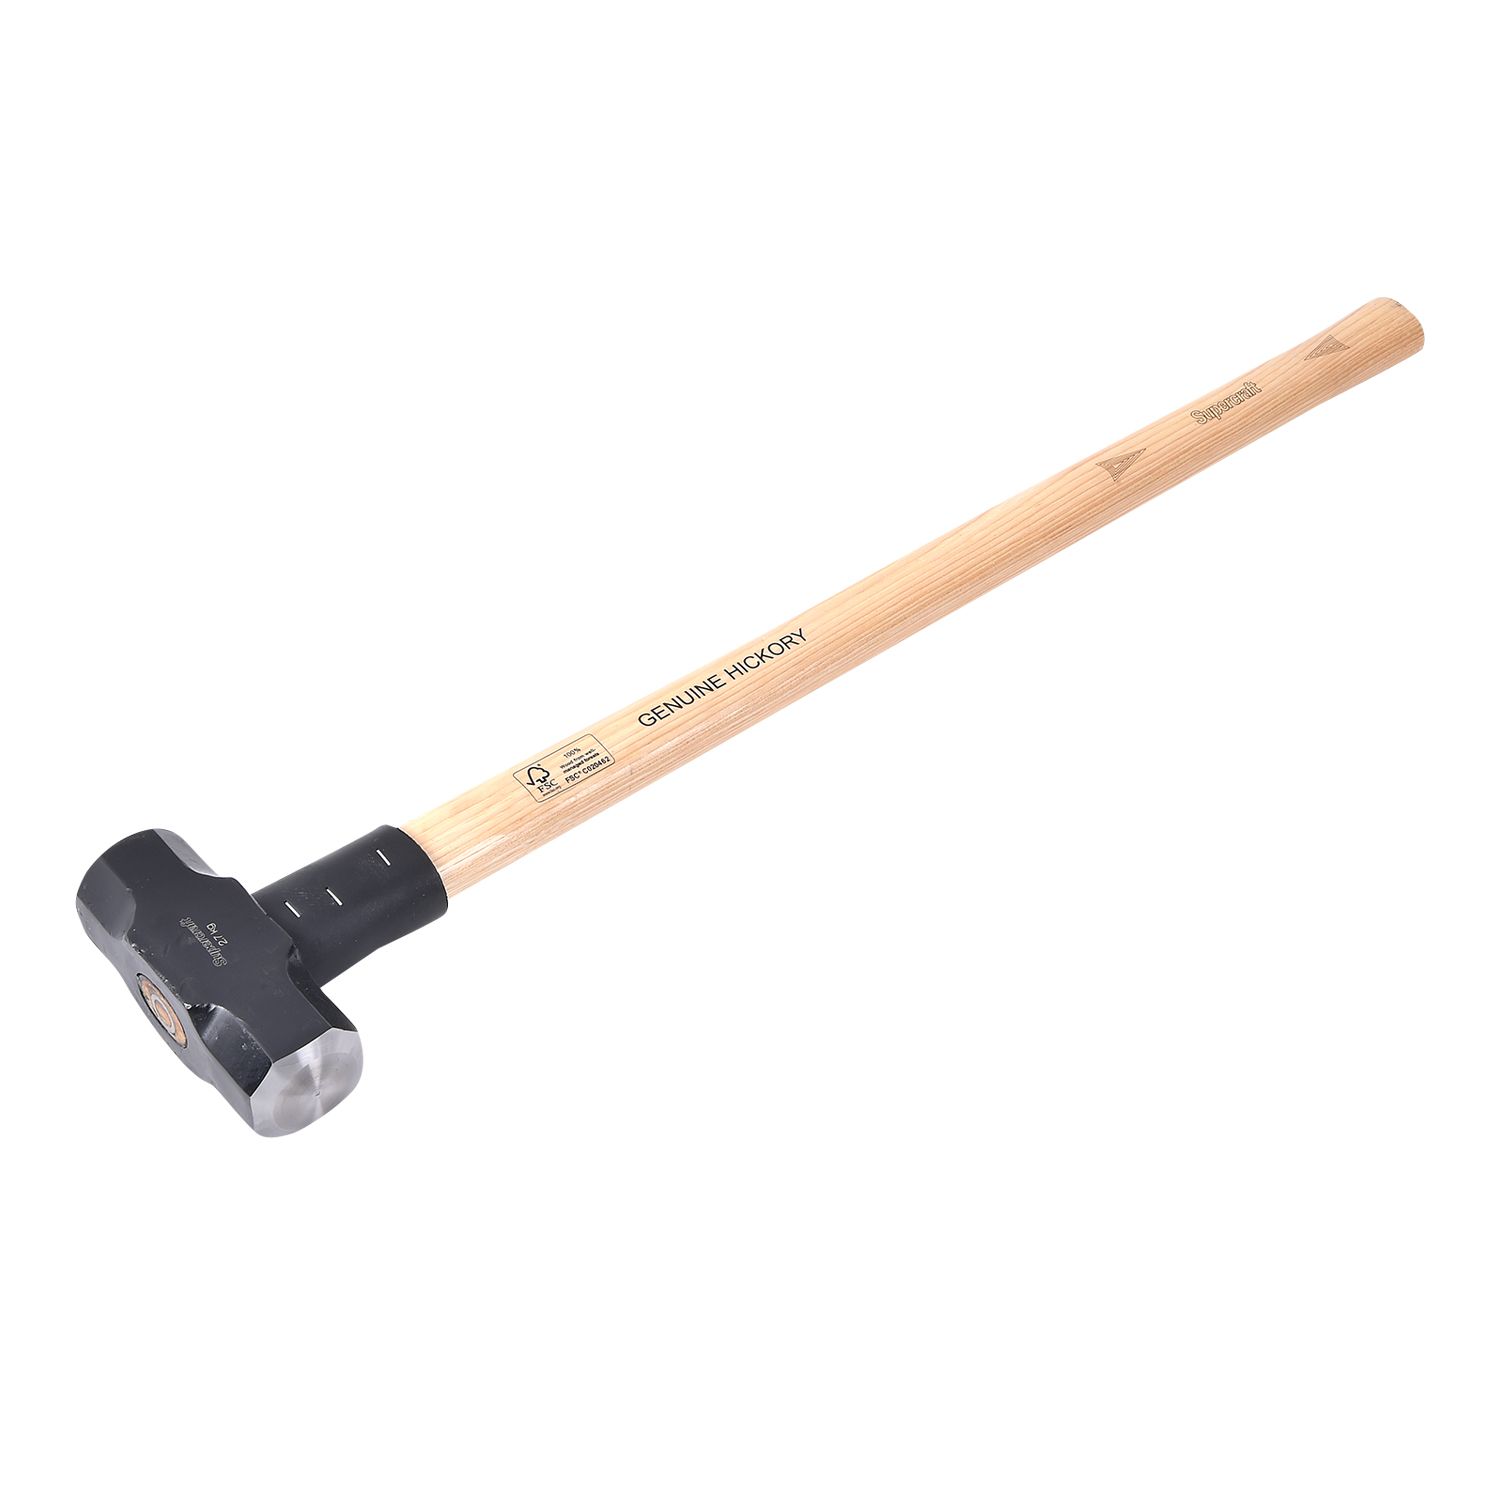 Supercraft Sledge Hammer with Handle | Bowens